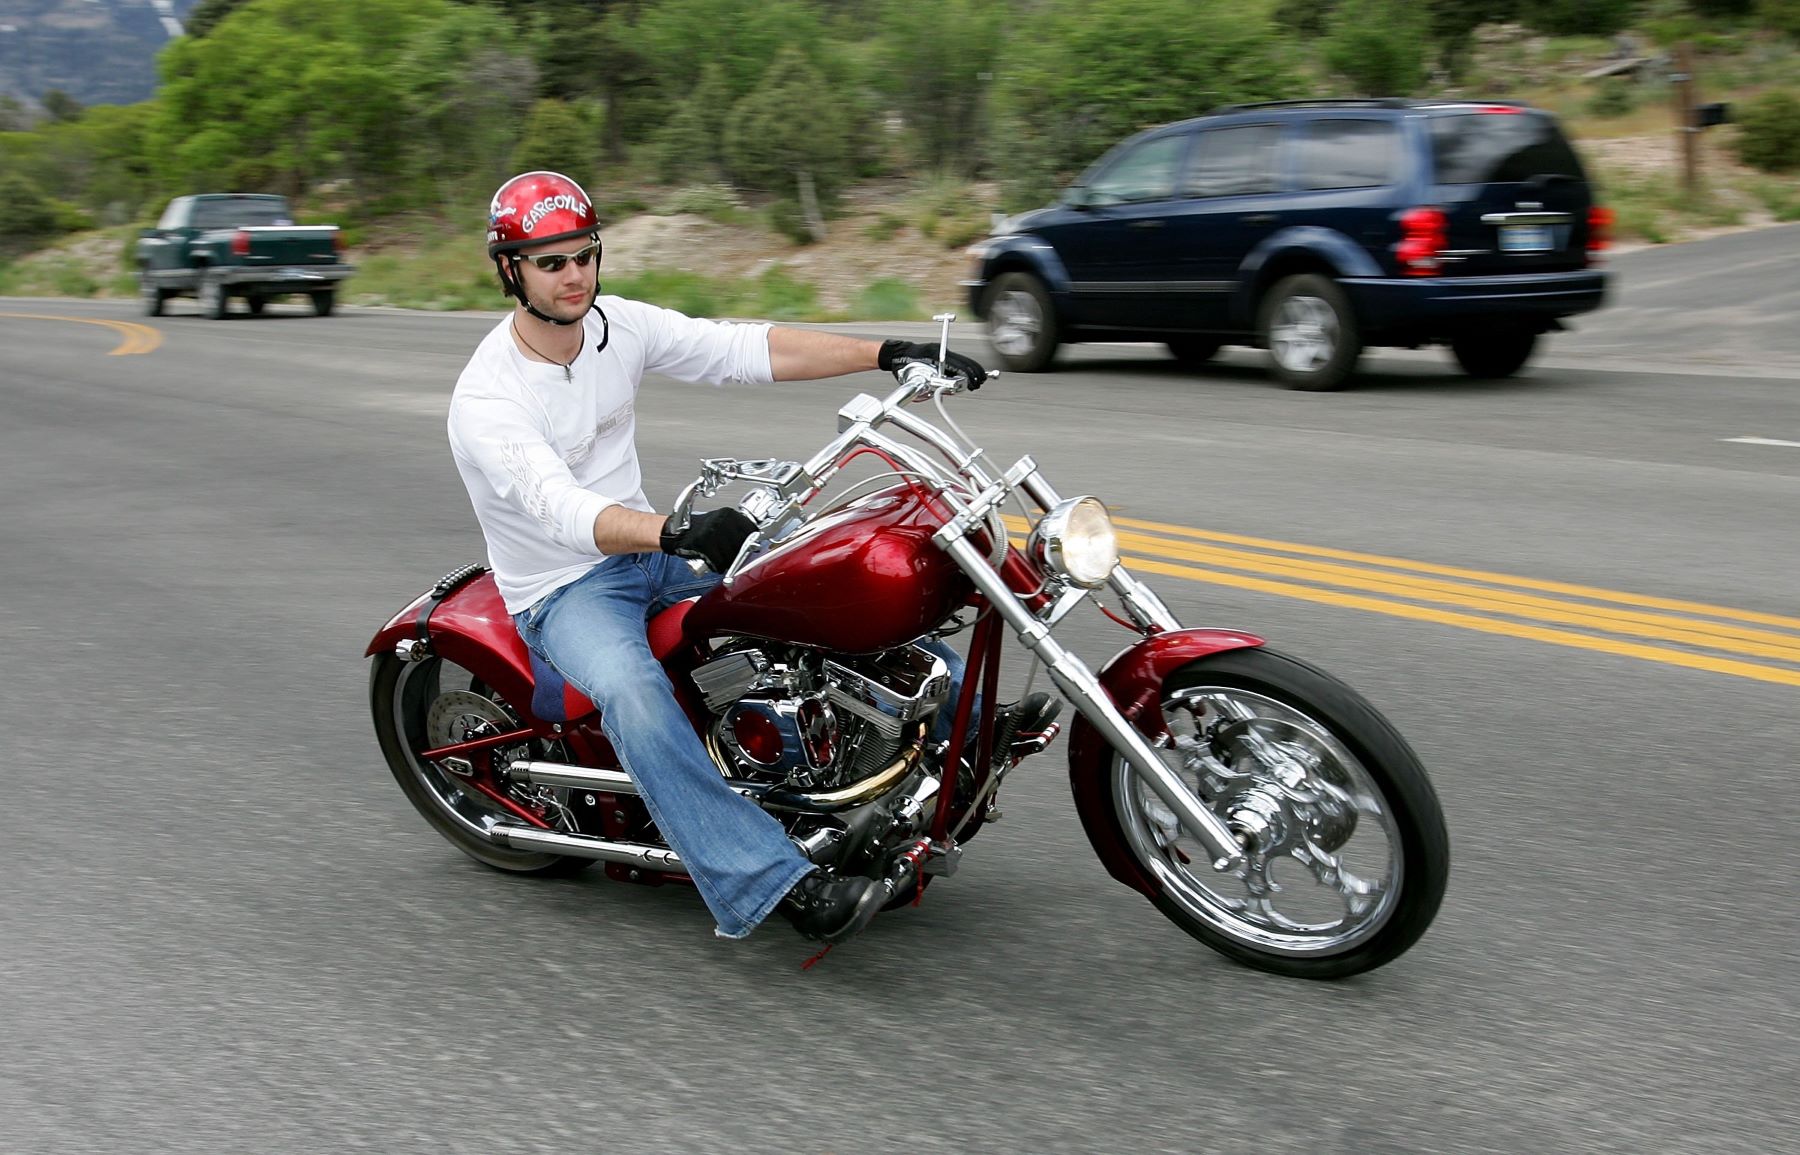 Brad Mates attending the Third Annual Academy of Country Music Celebrity Motorcycle Ride in Las Vegas, Nevada